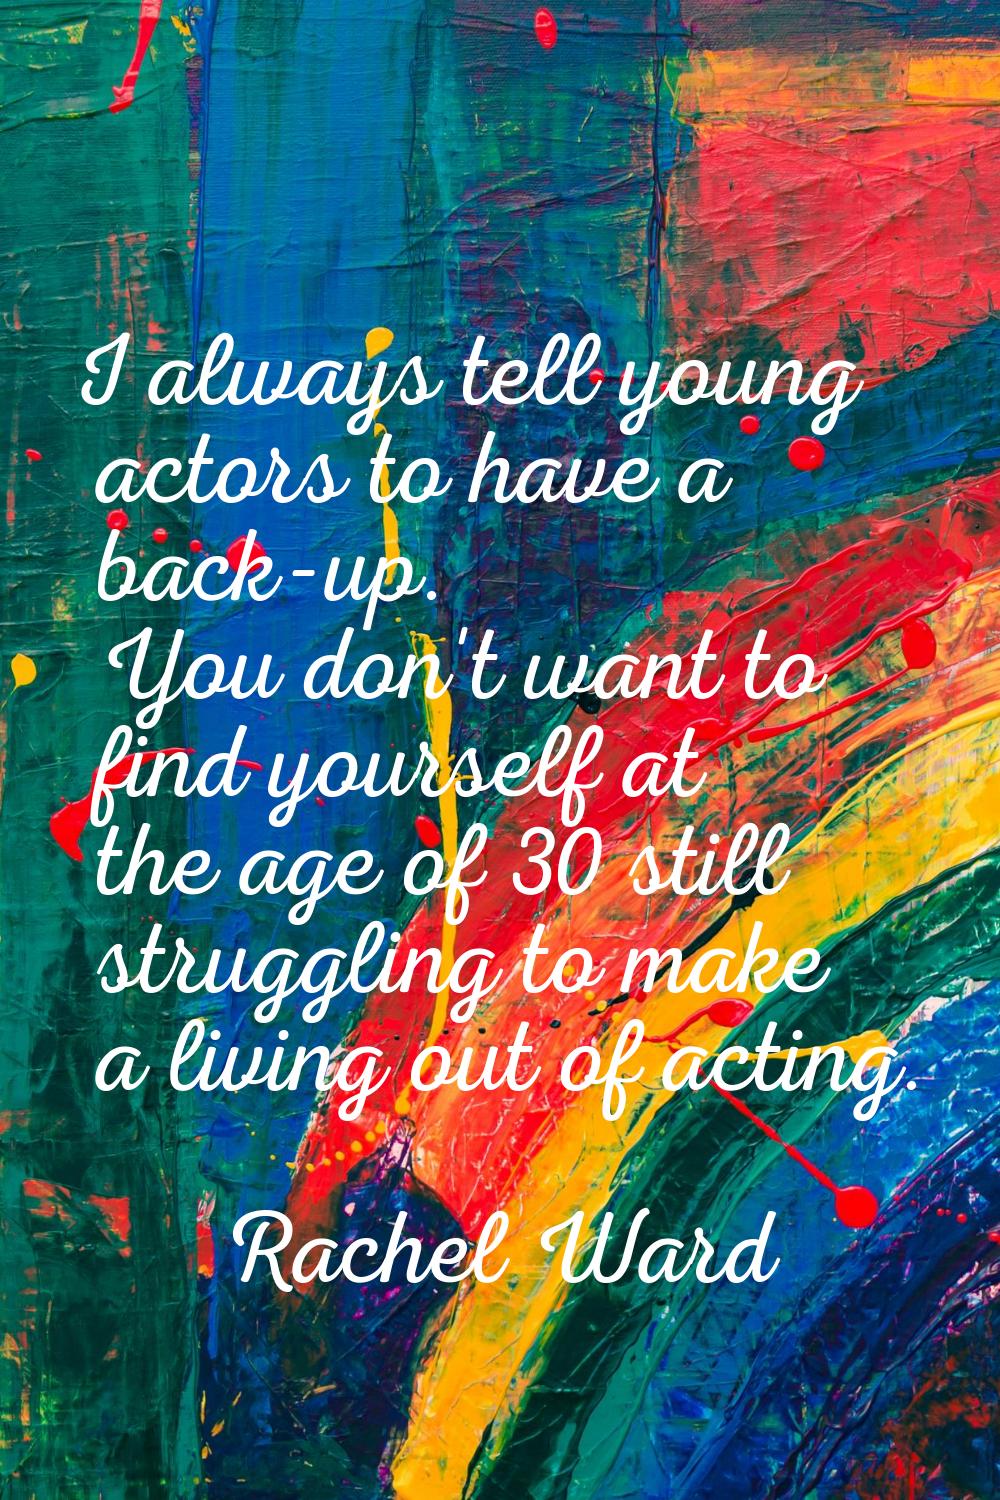 I always tell young actors to have a back-up. You don't want to find yourself at the age of 30 stil